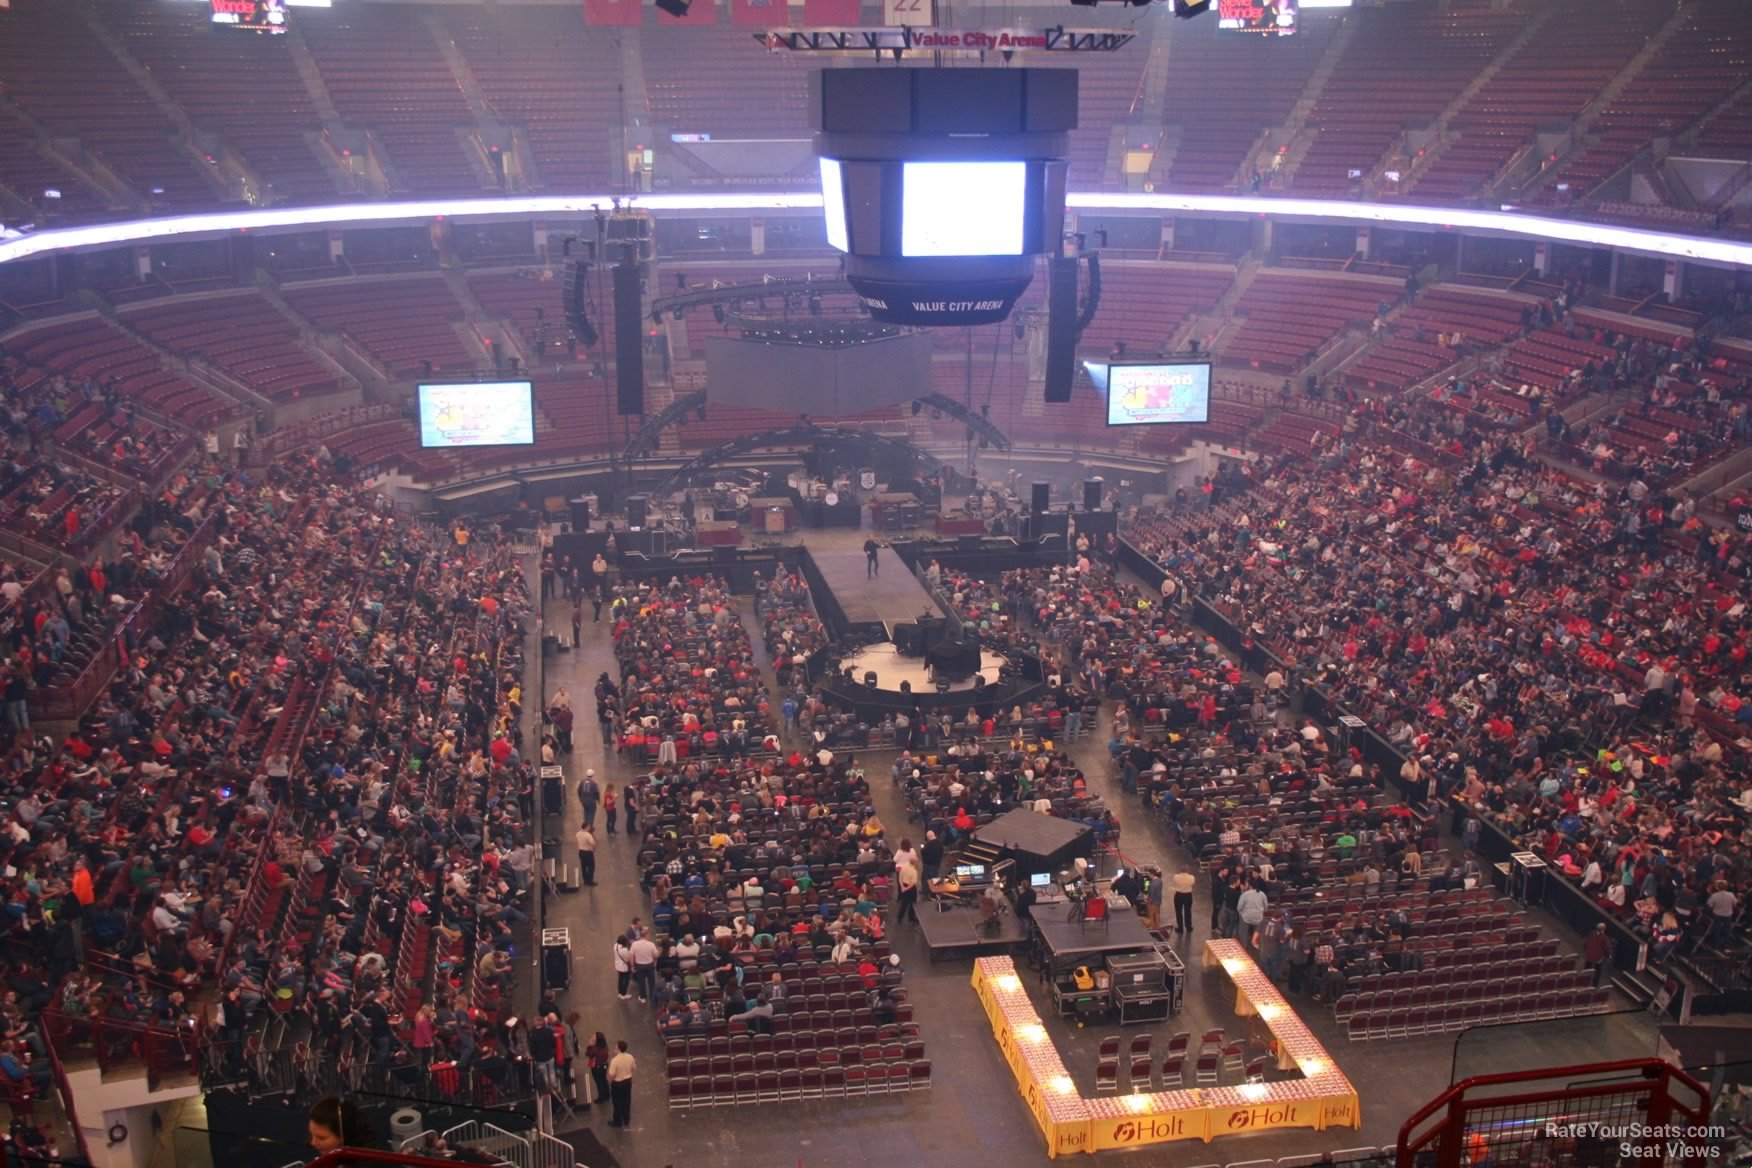 section 332, row j seat view  for concert - schottenstein center